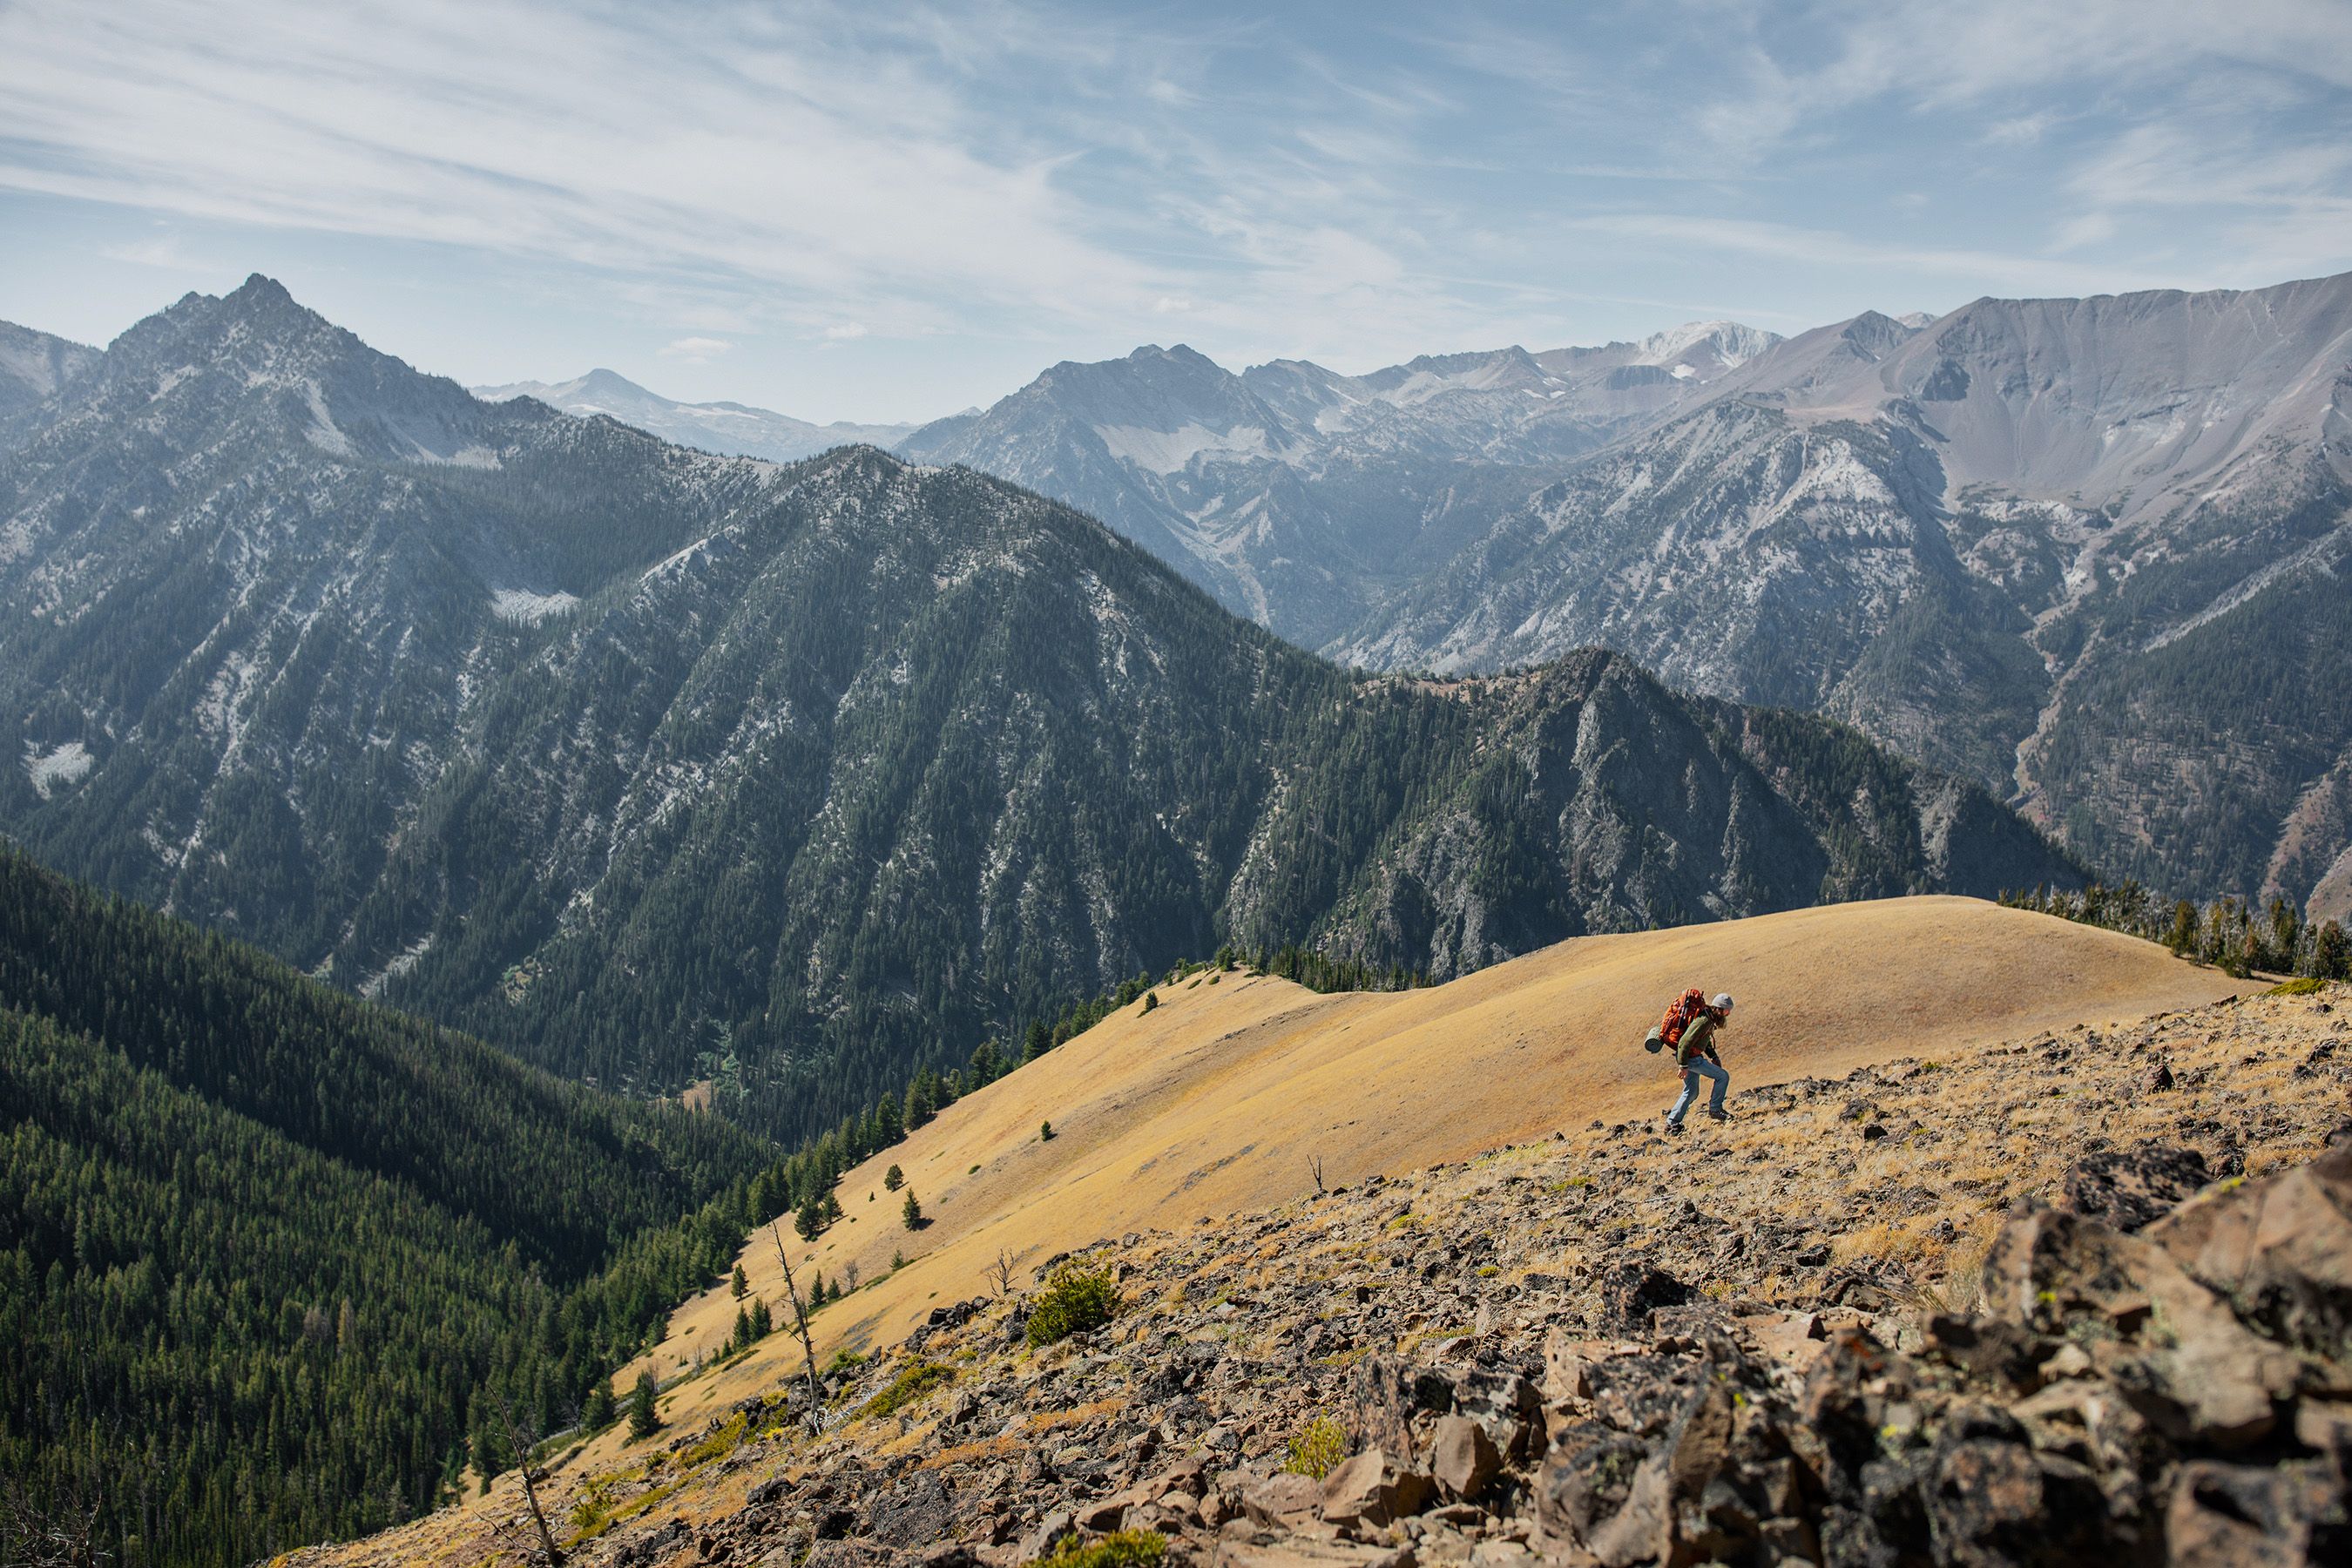 Person wearing a large backpack hiking up a mountain side in front of a mountain range covered in trees